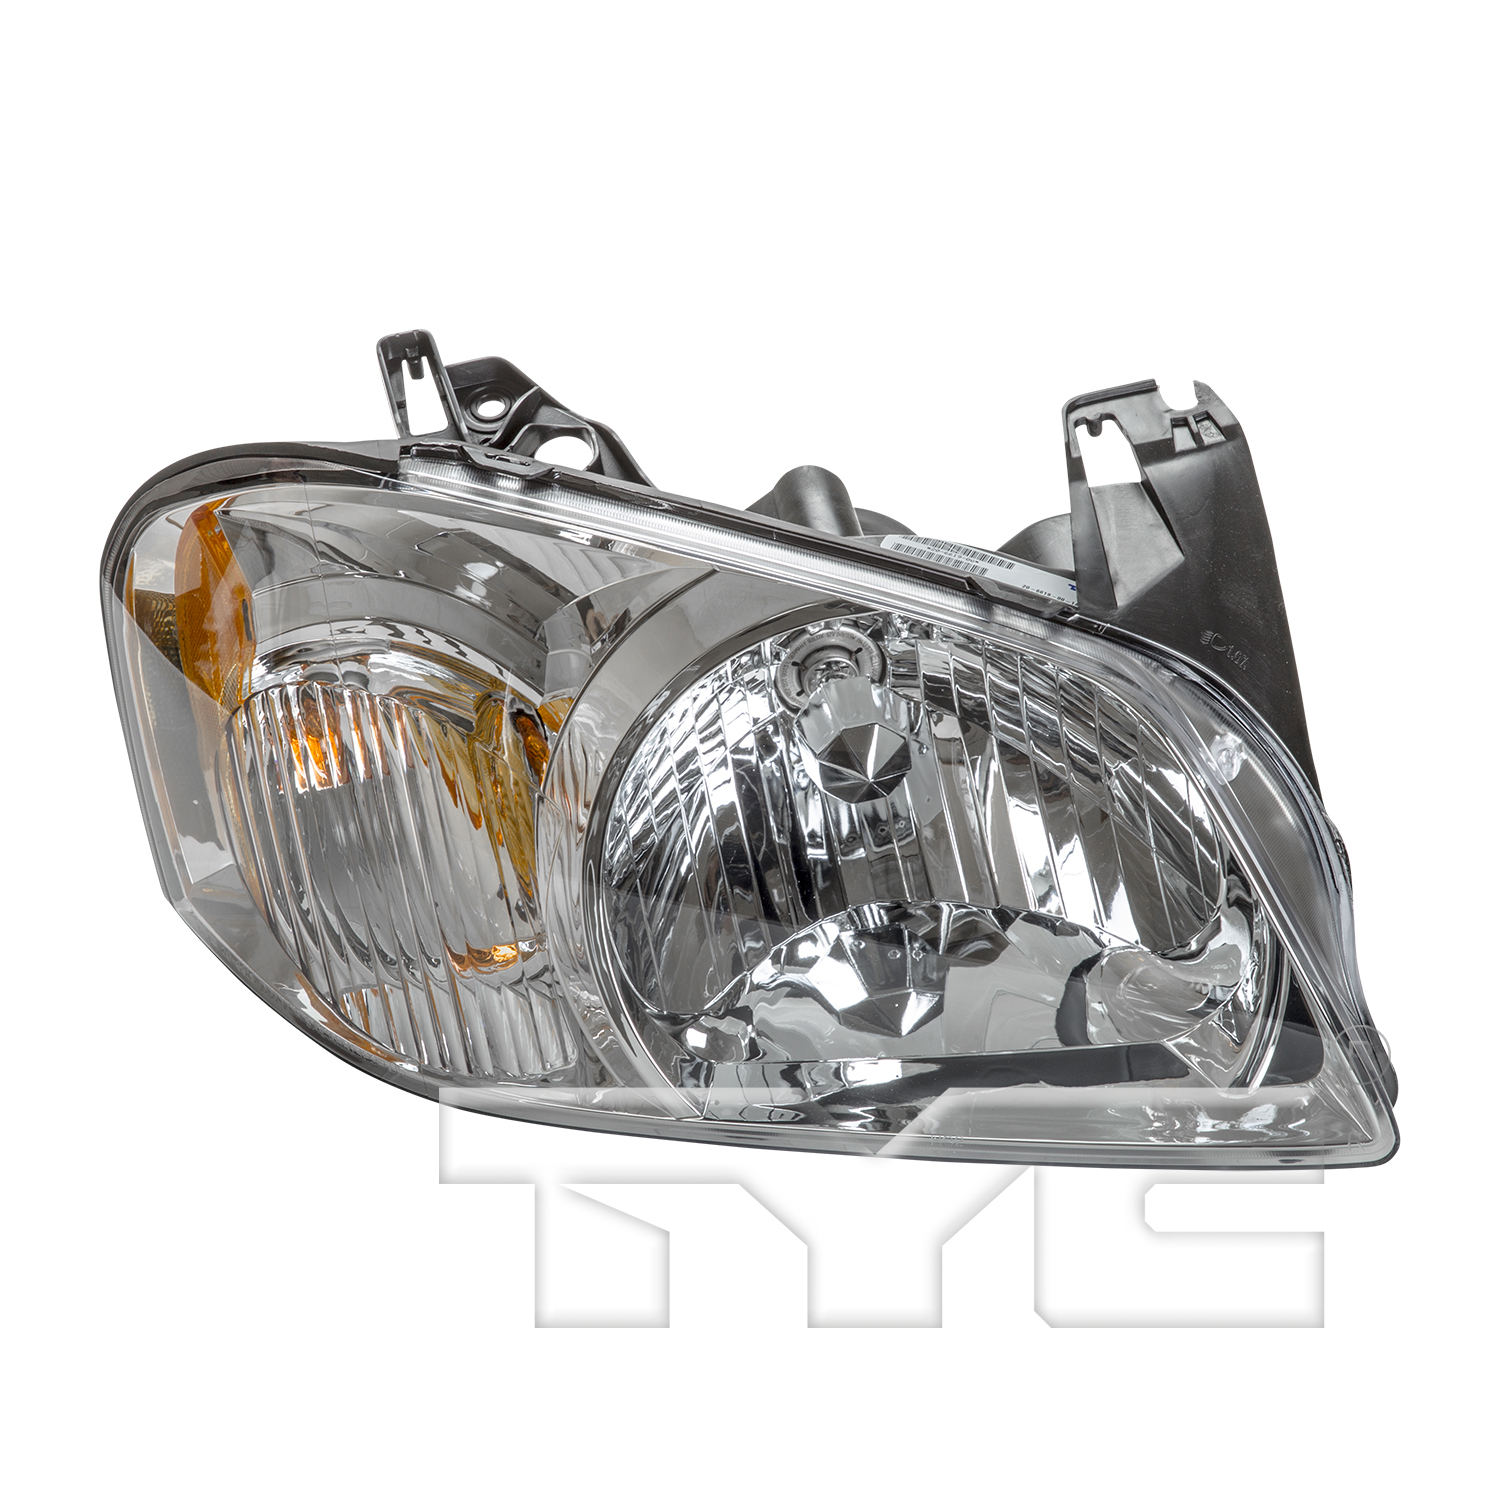 Aftermarket HEADLIGHTS for MAZDA - TRIBUTE, TRIBUTE,05-06,RT Headlamp assy composite